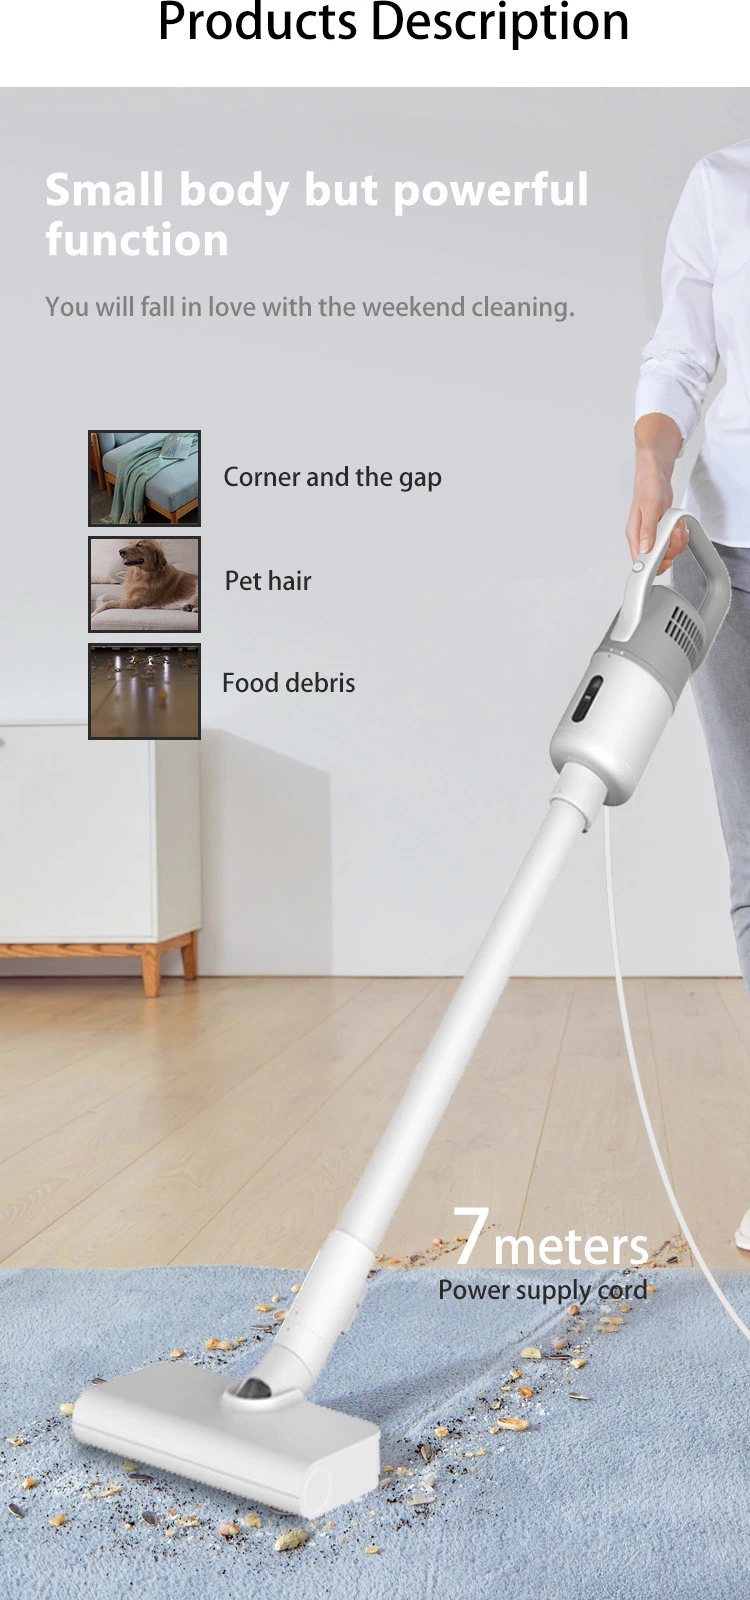 Hand Held Vacuum Cleaner Portable Cleaning Mop 7m Power Cord